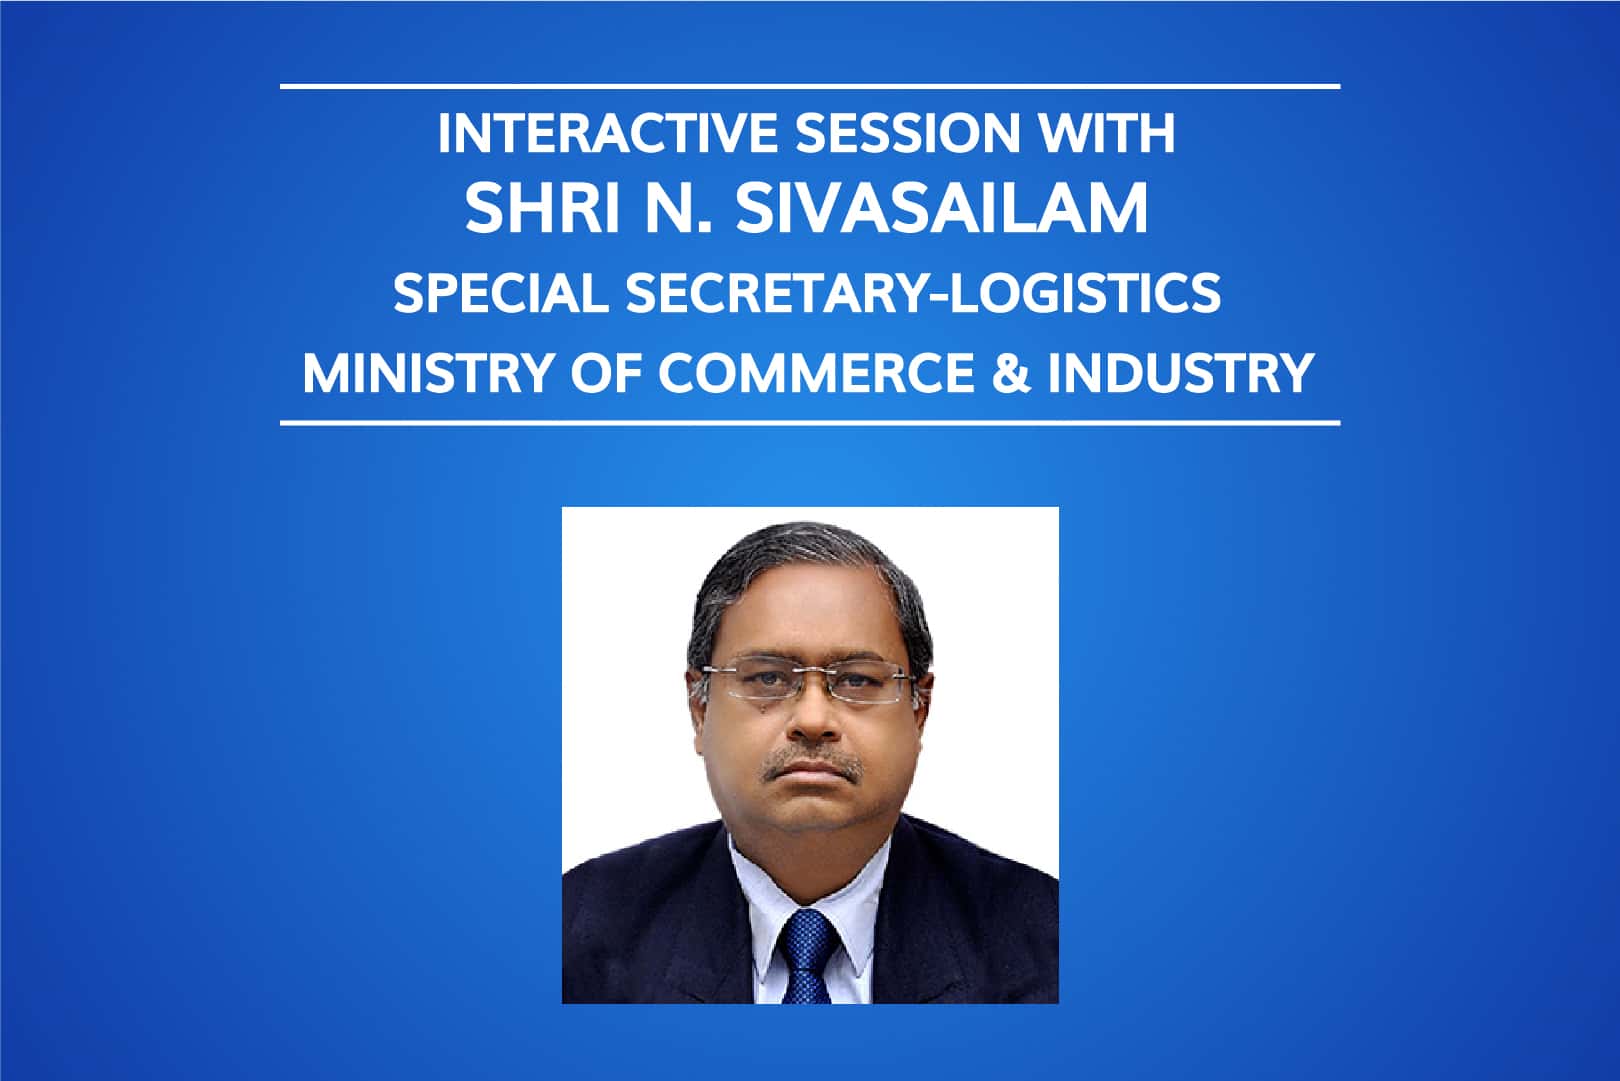 An Interactive Session With Shri N Sivasailam